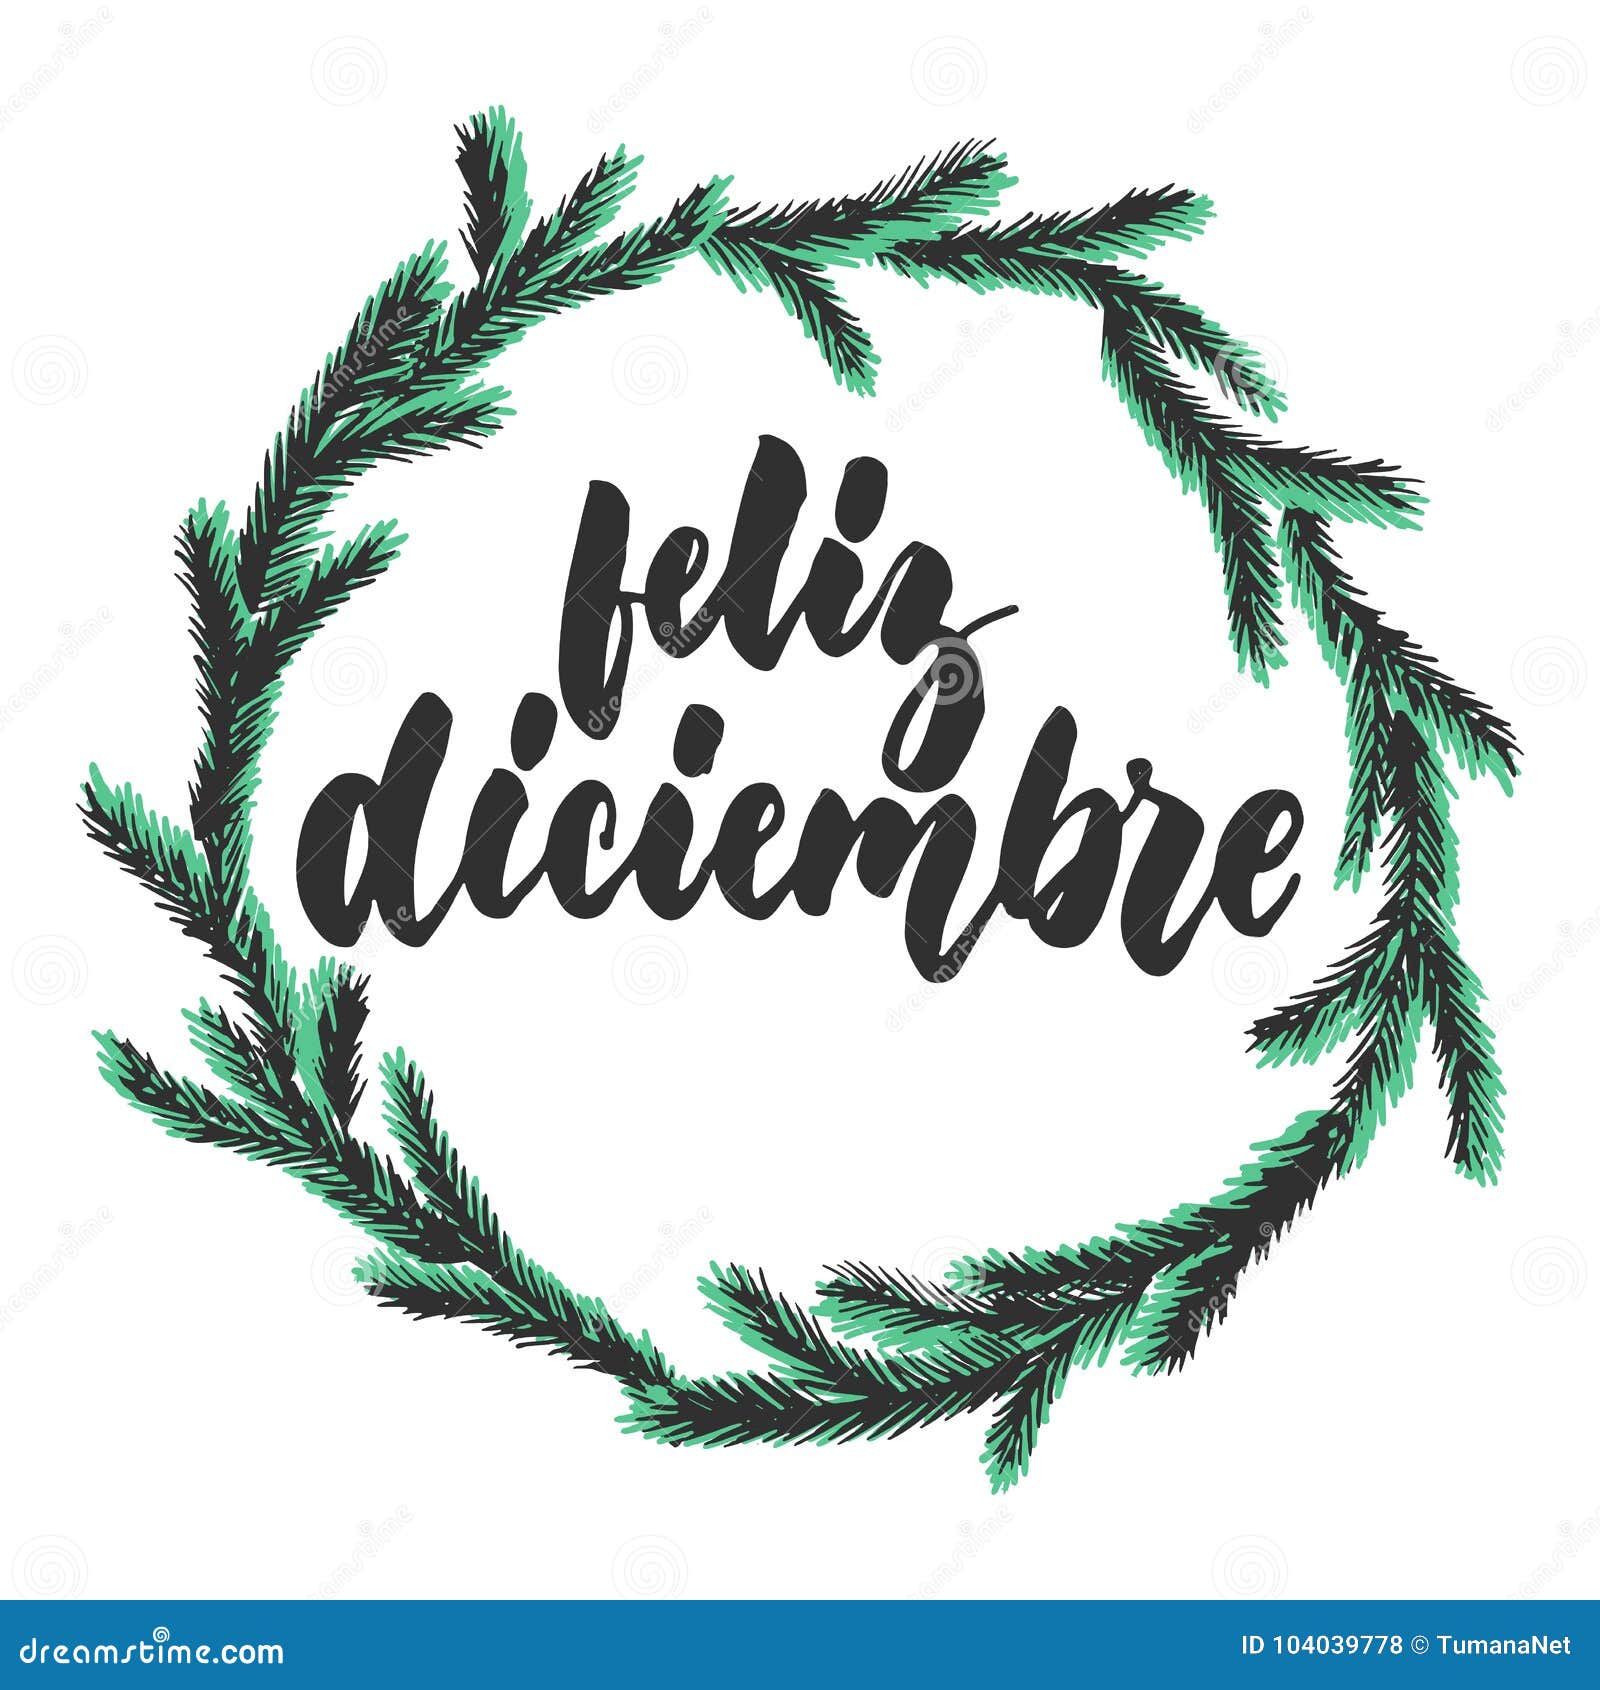 feliz diciembre - happy december in spanish, hand drawn winter latin month lettering quote with seasonal wreath 